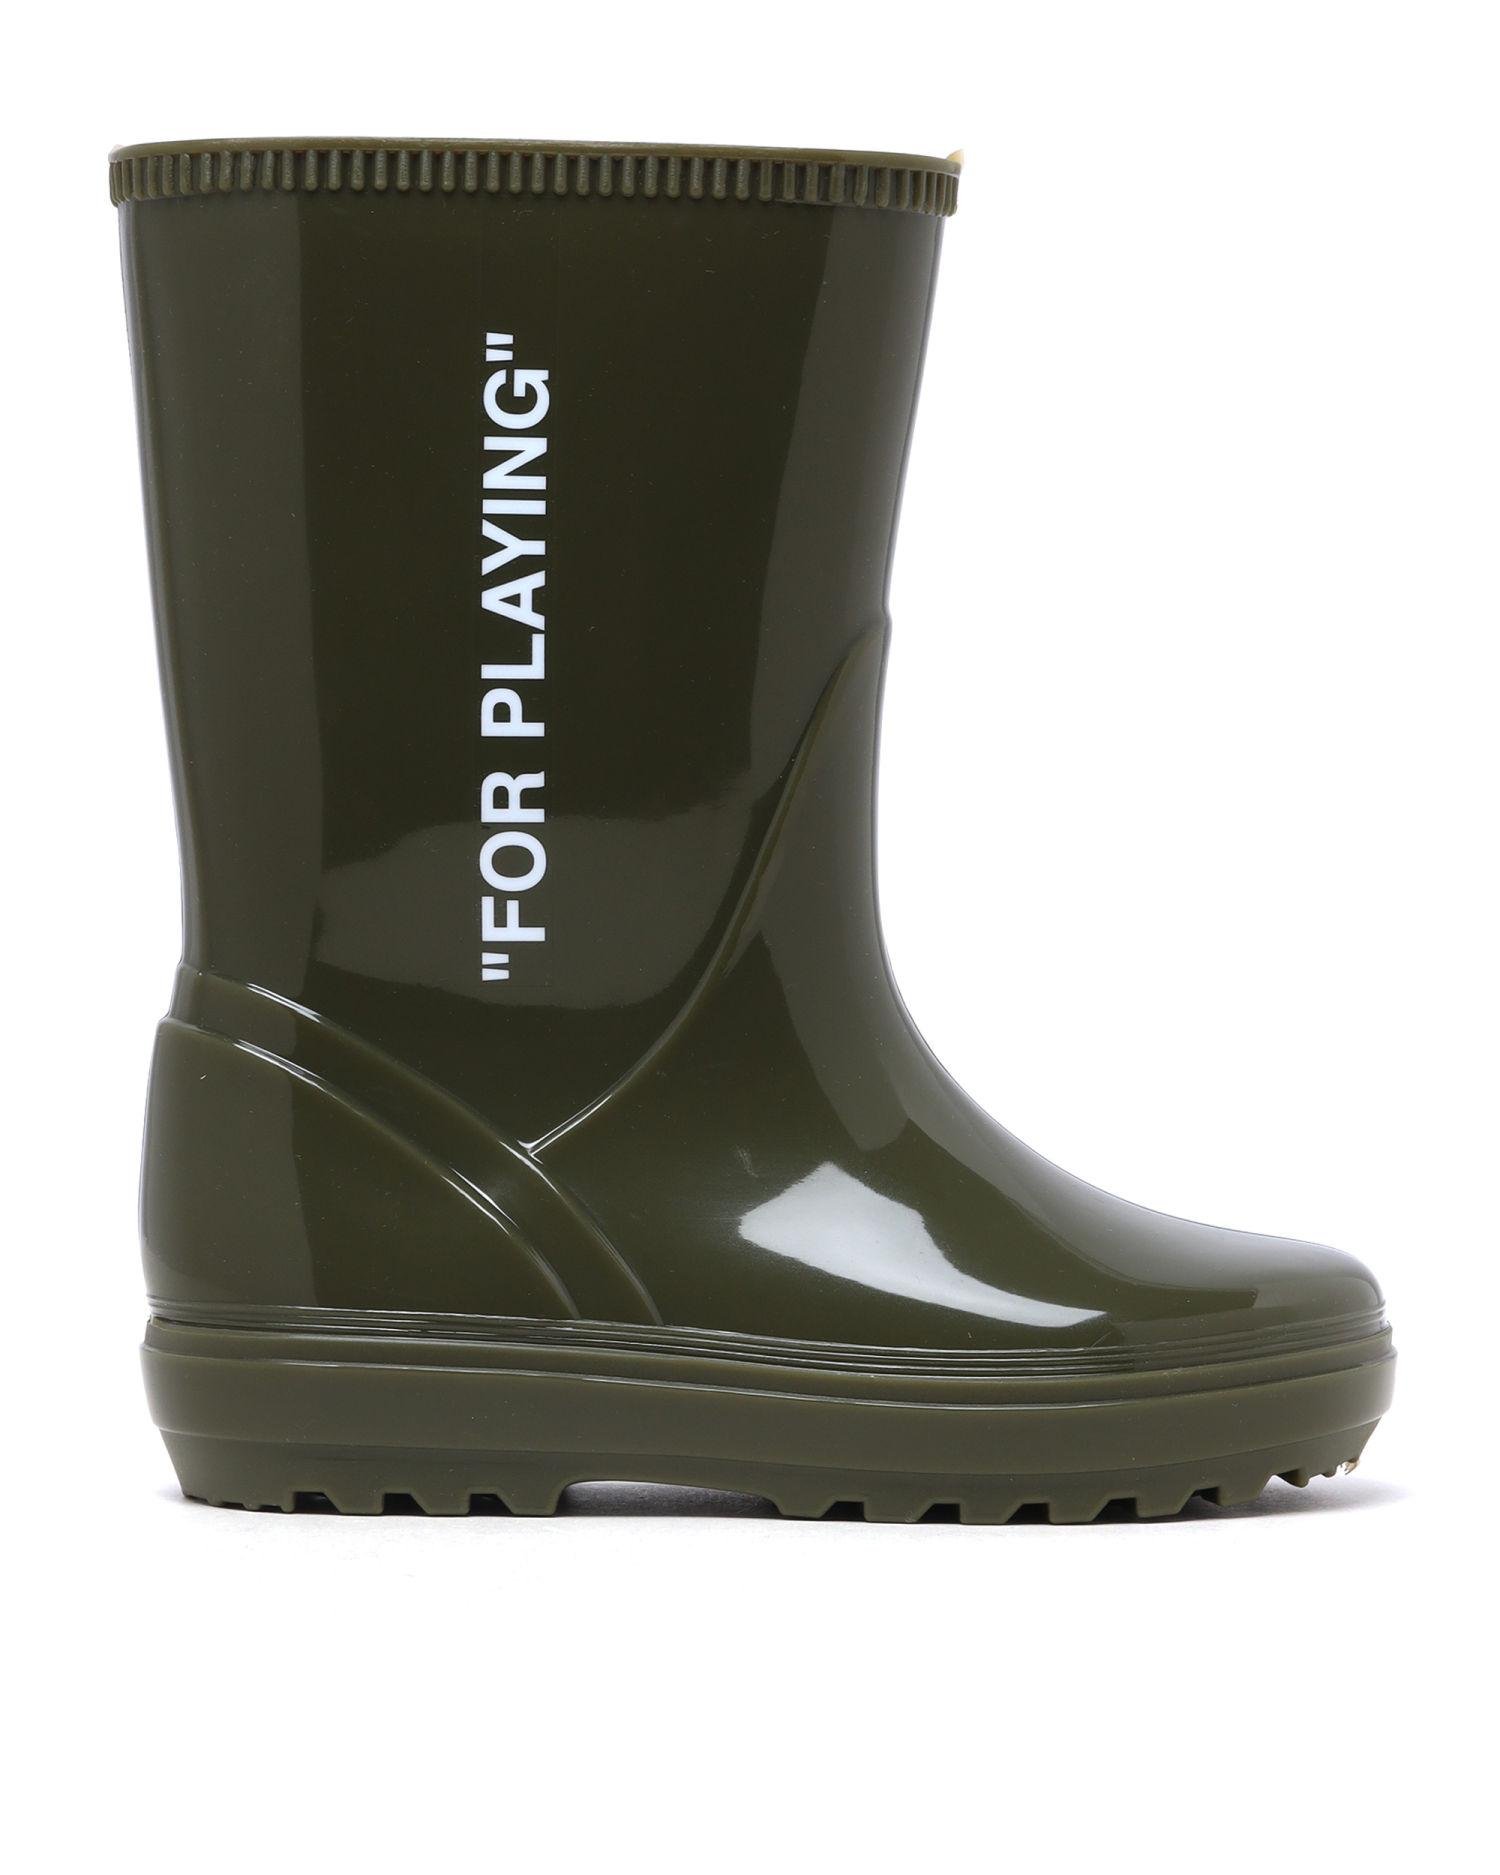 Kids For Playing rain boots by OFF-WHITE